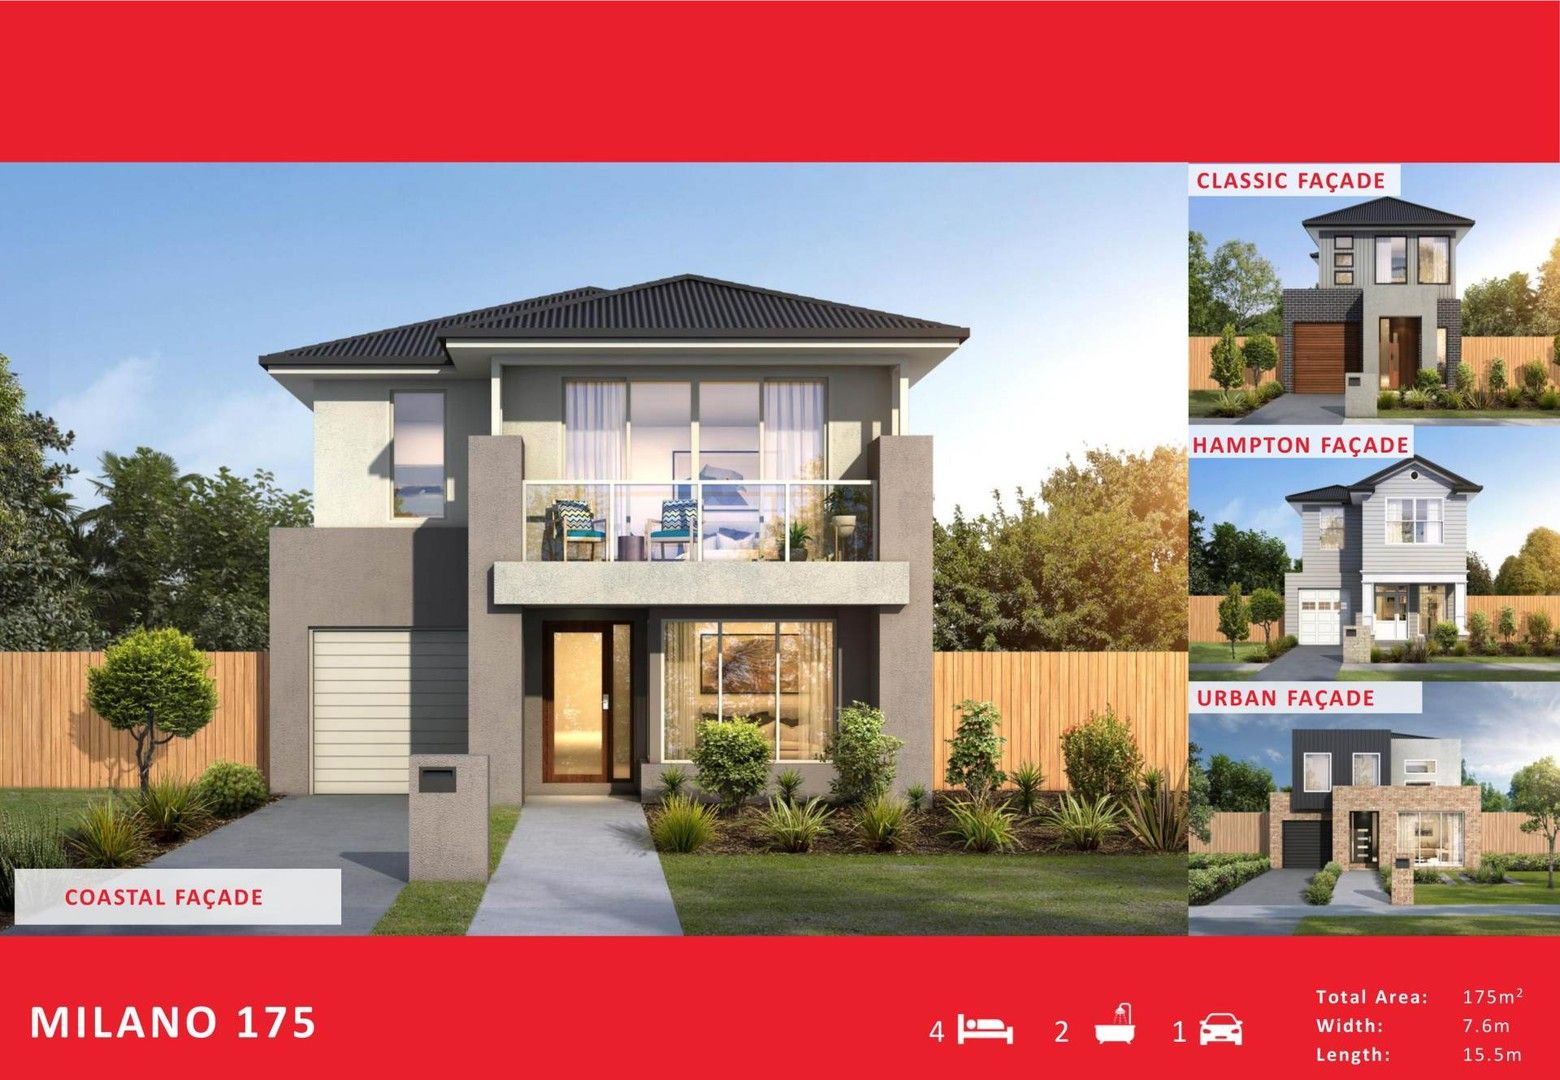 4 bedrooms New House & Land in CONTACT/AGENT BOXHILL BOX HILL NSW, 2765